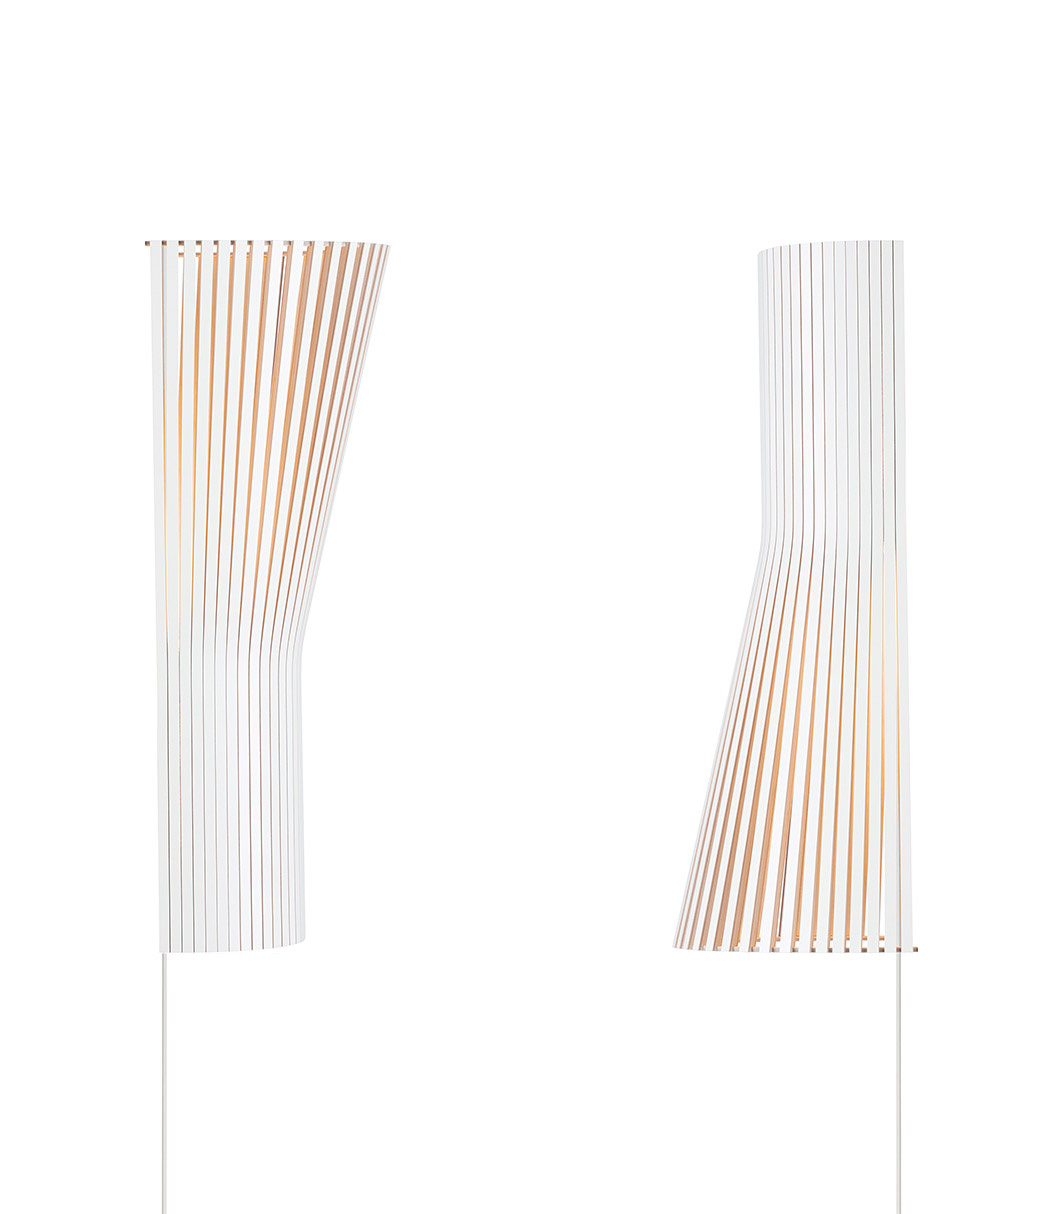 Secto Small 4231 wall lamp is available in white laminated